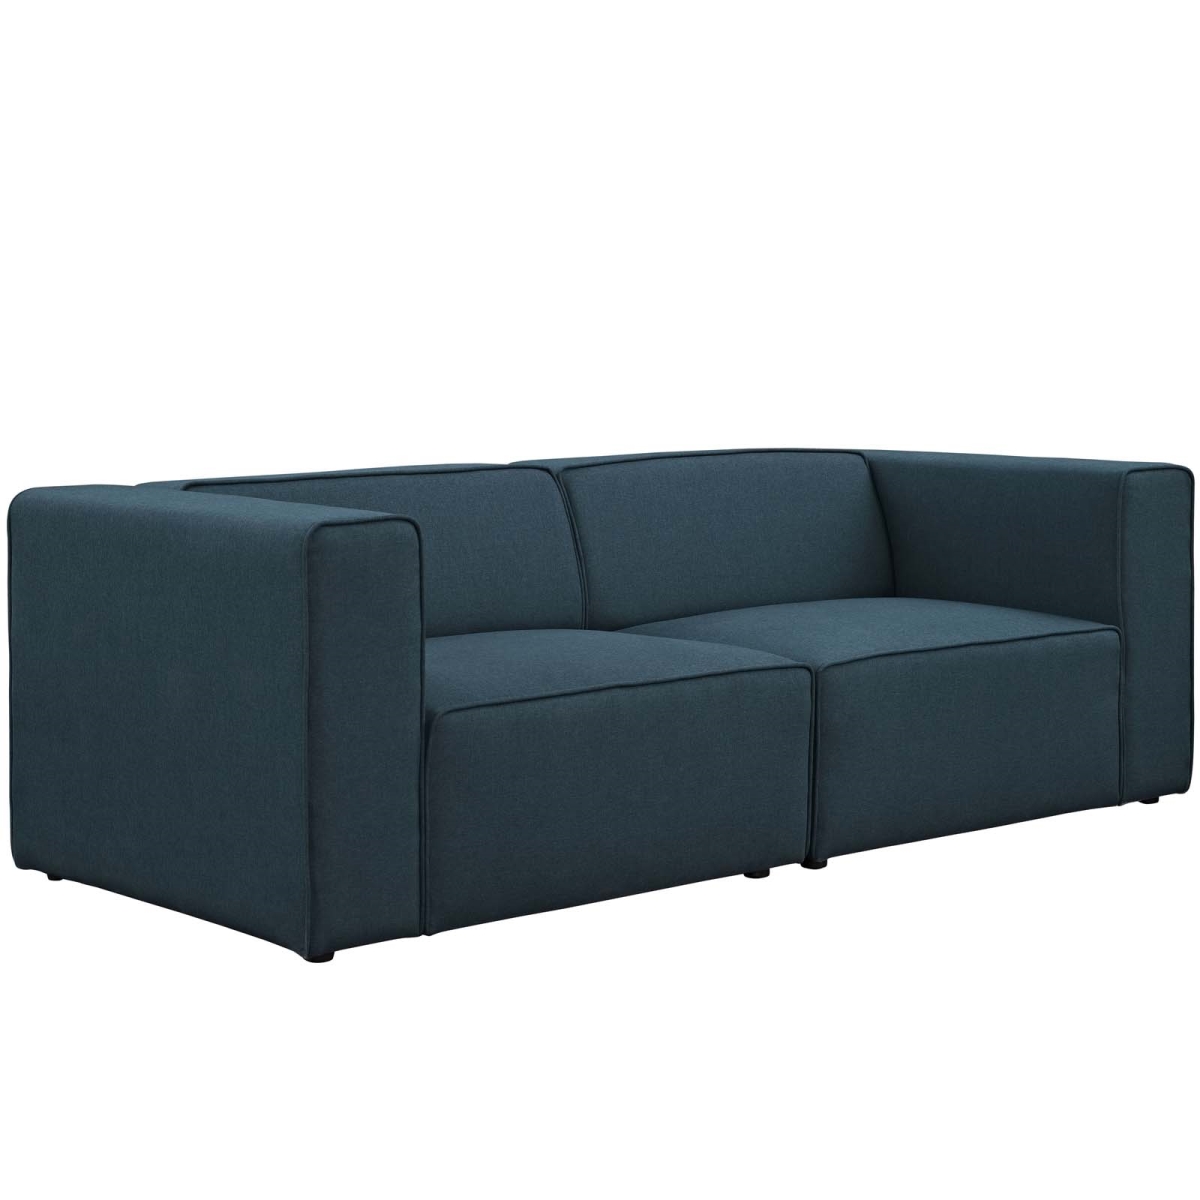 Eei-2825-blu 2 Piece Mingle Upholstered Fabric Sectional Sofa Set - Blue, 27 X 87 X 37 In.